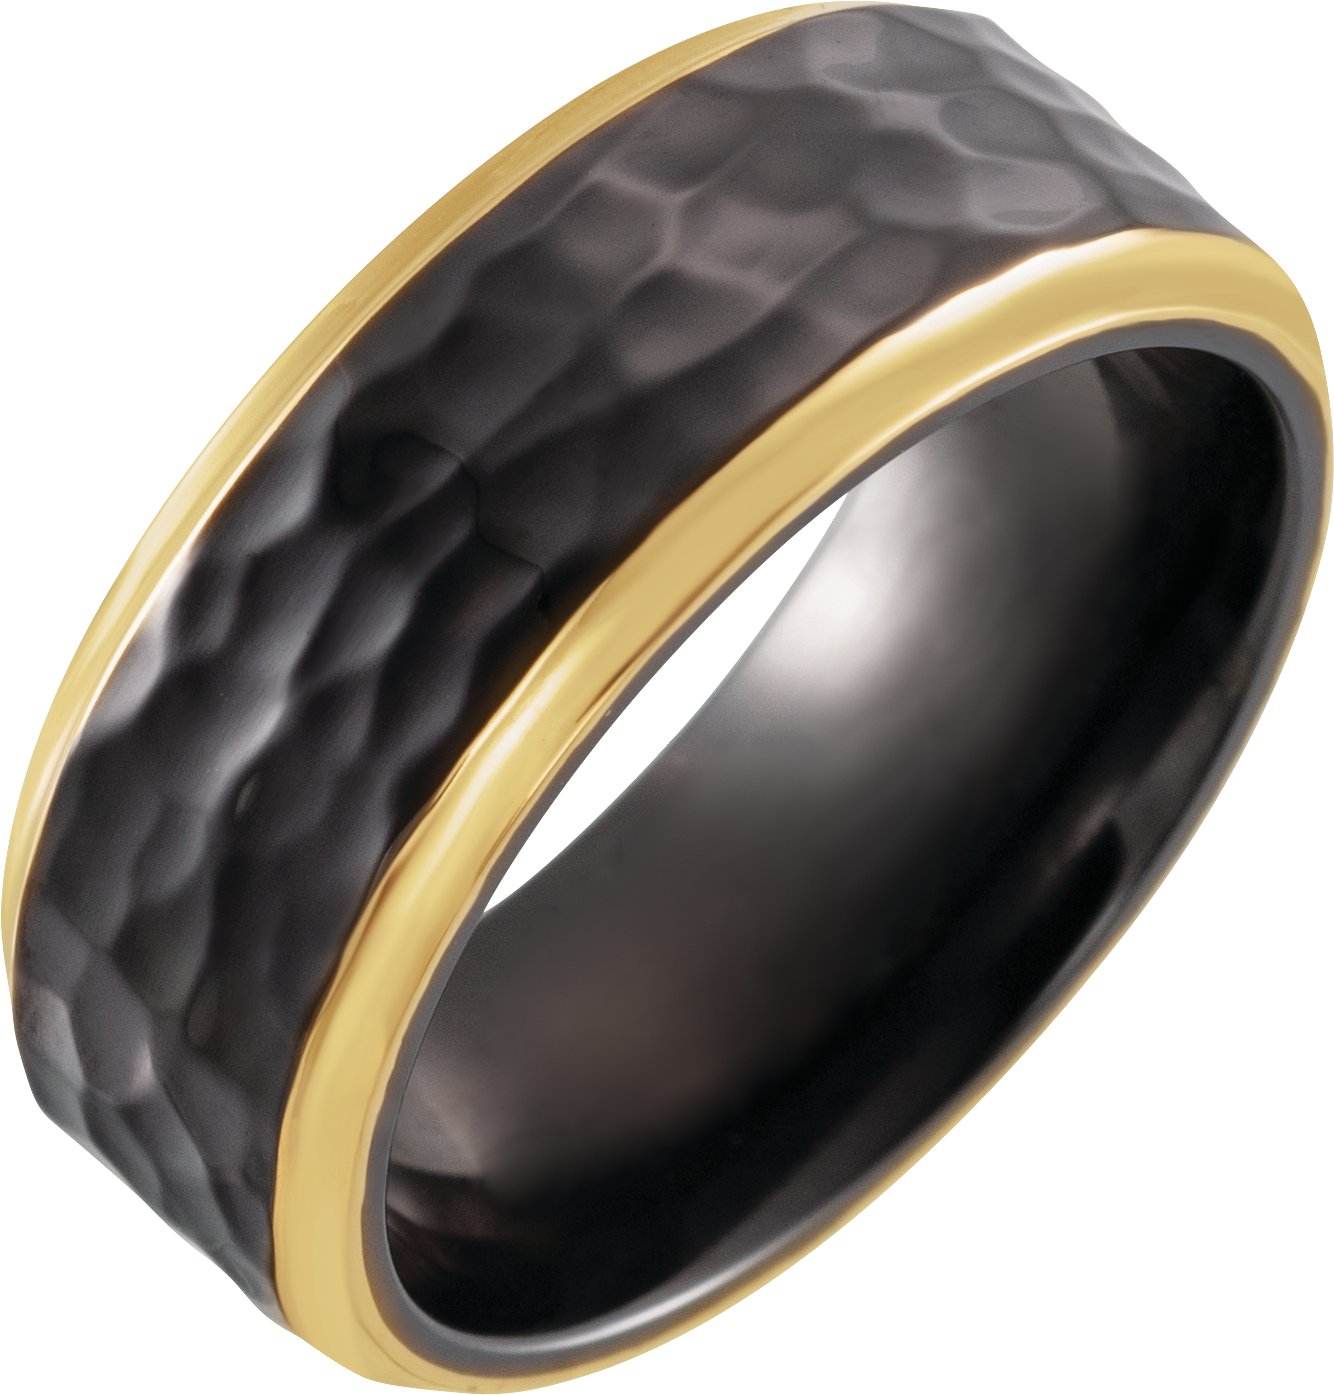 18K Yellow Gold PVD Black Titanium 8 mm Flat Size 9 Band with Hammer Finish